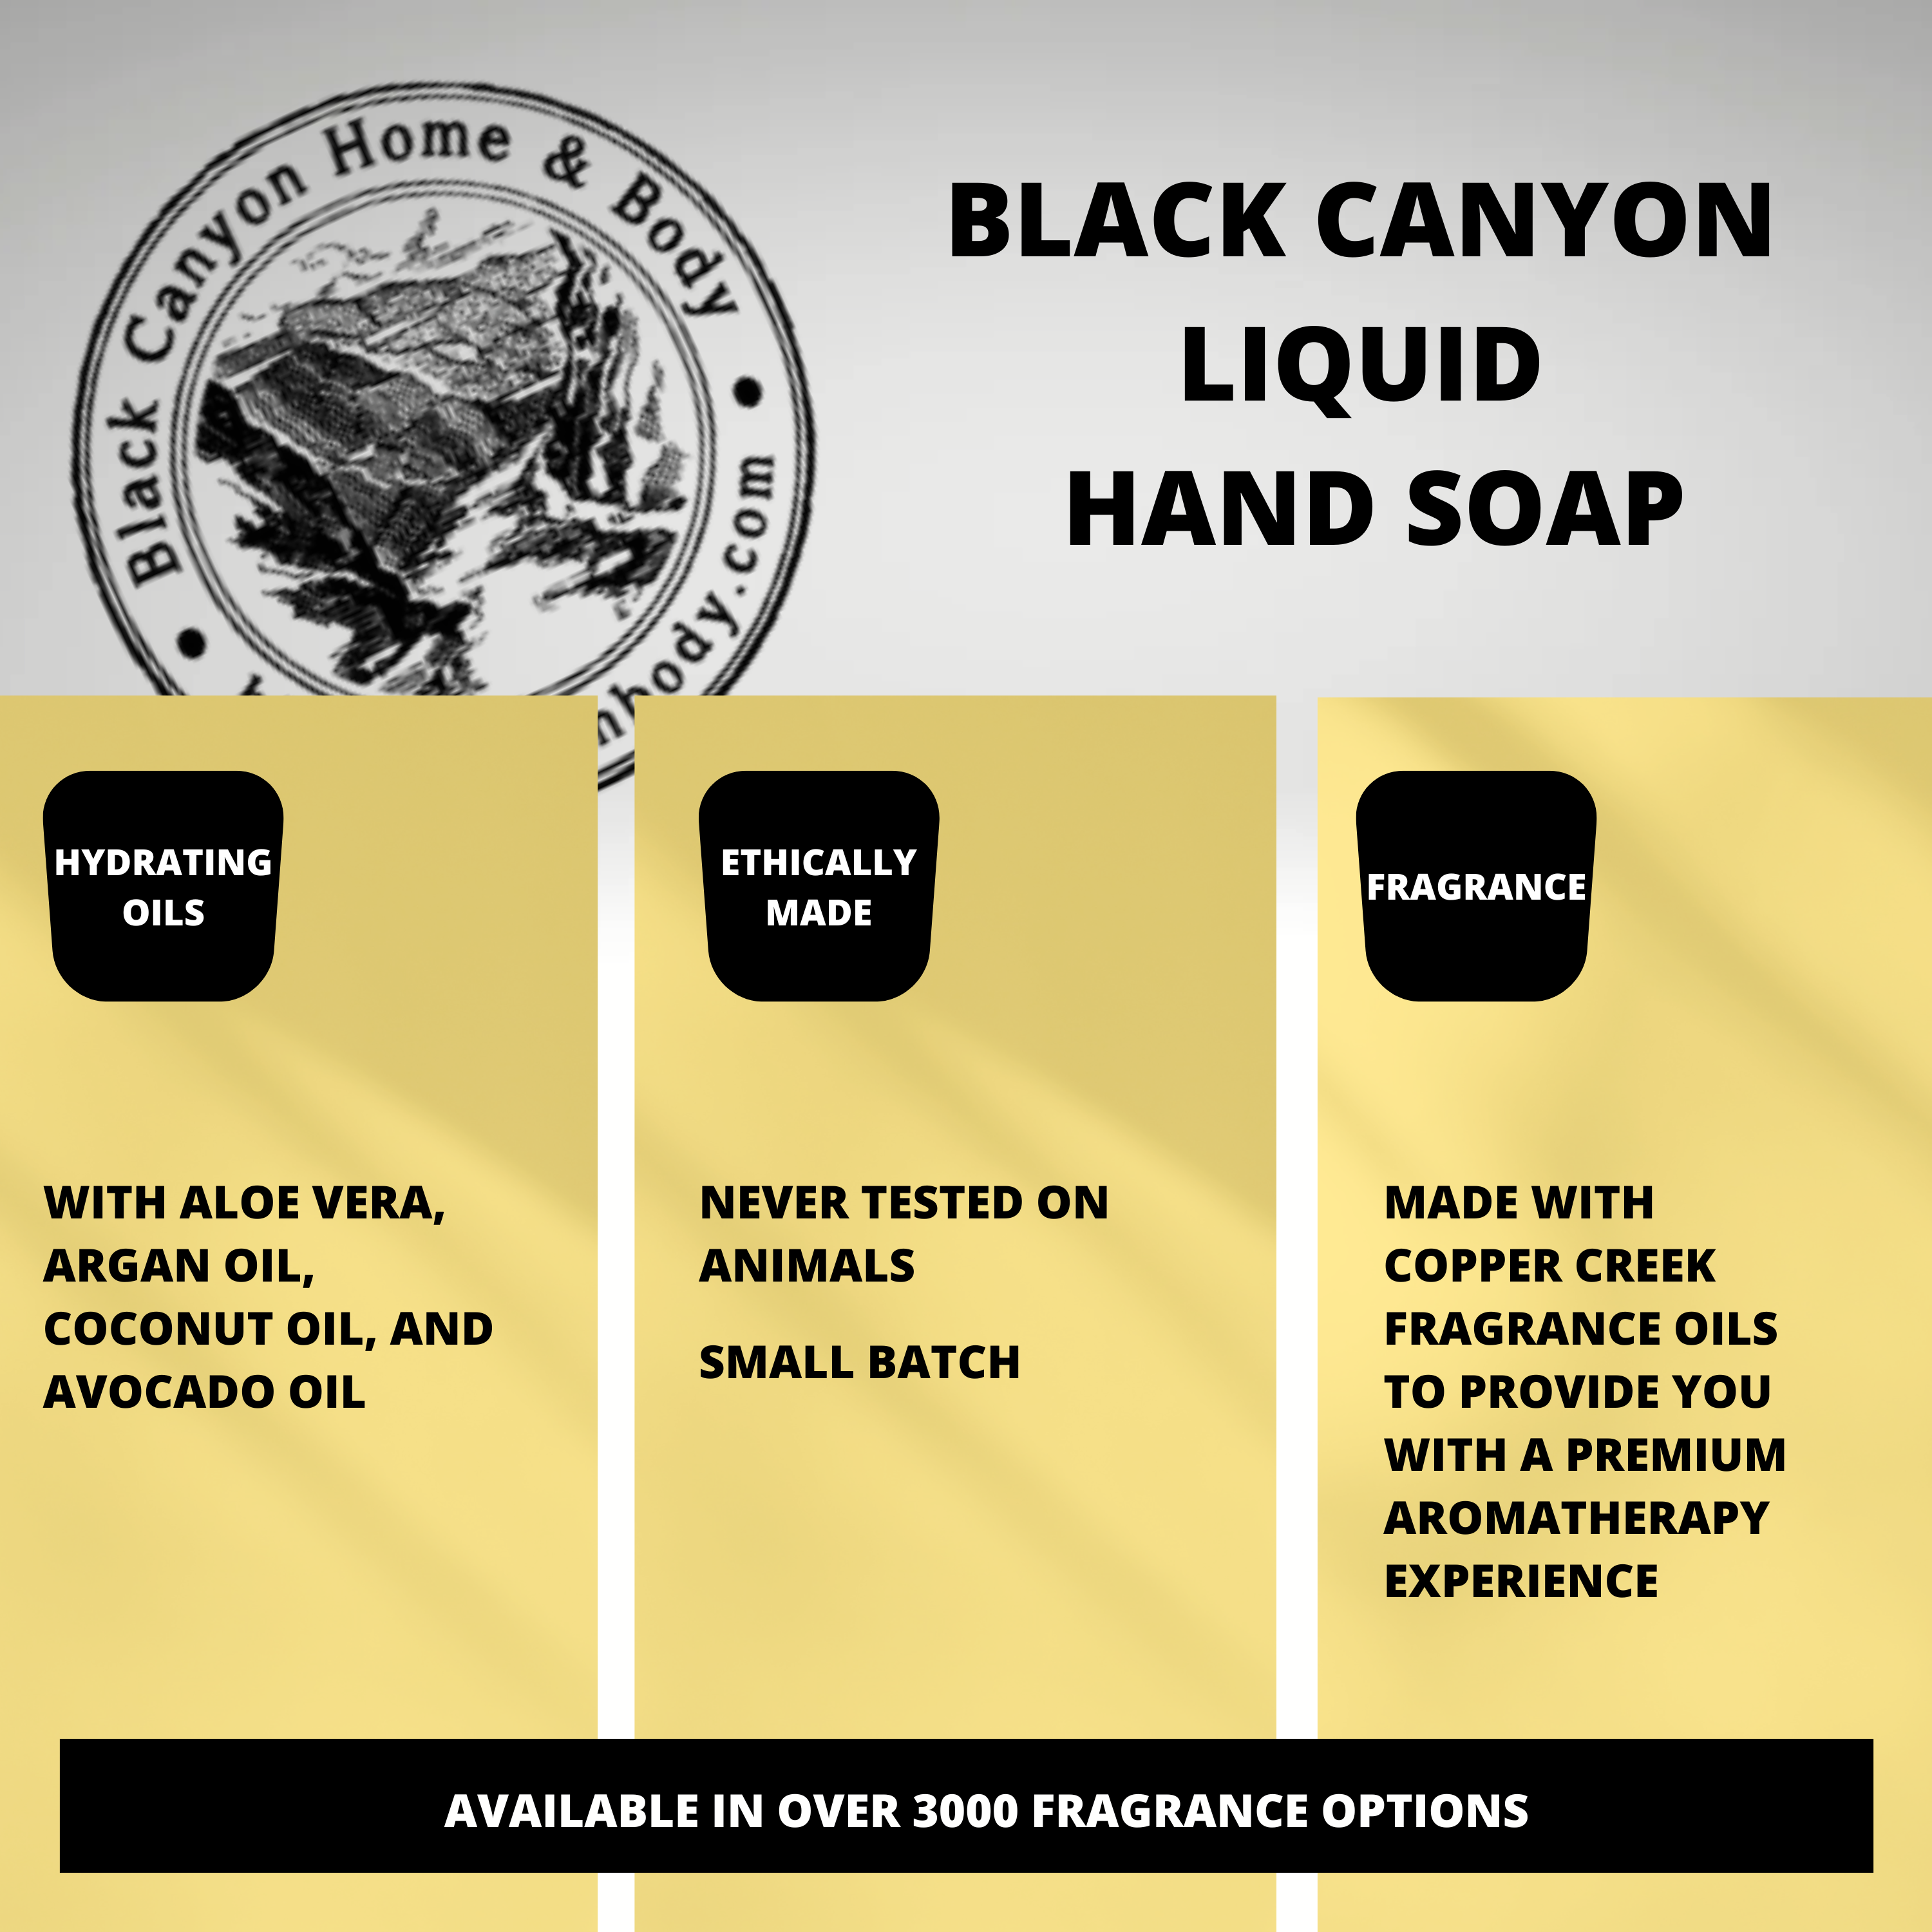 Black Canyon Grapefruit & Quince Scented Liquid Hand Soap